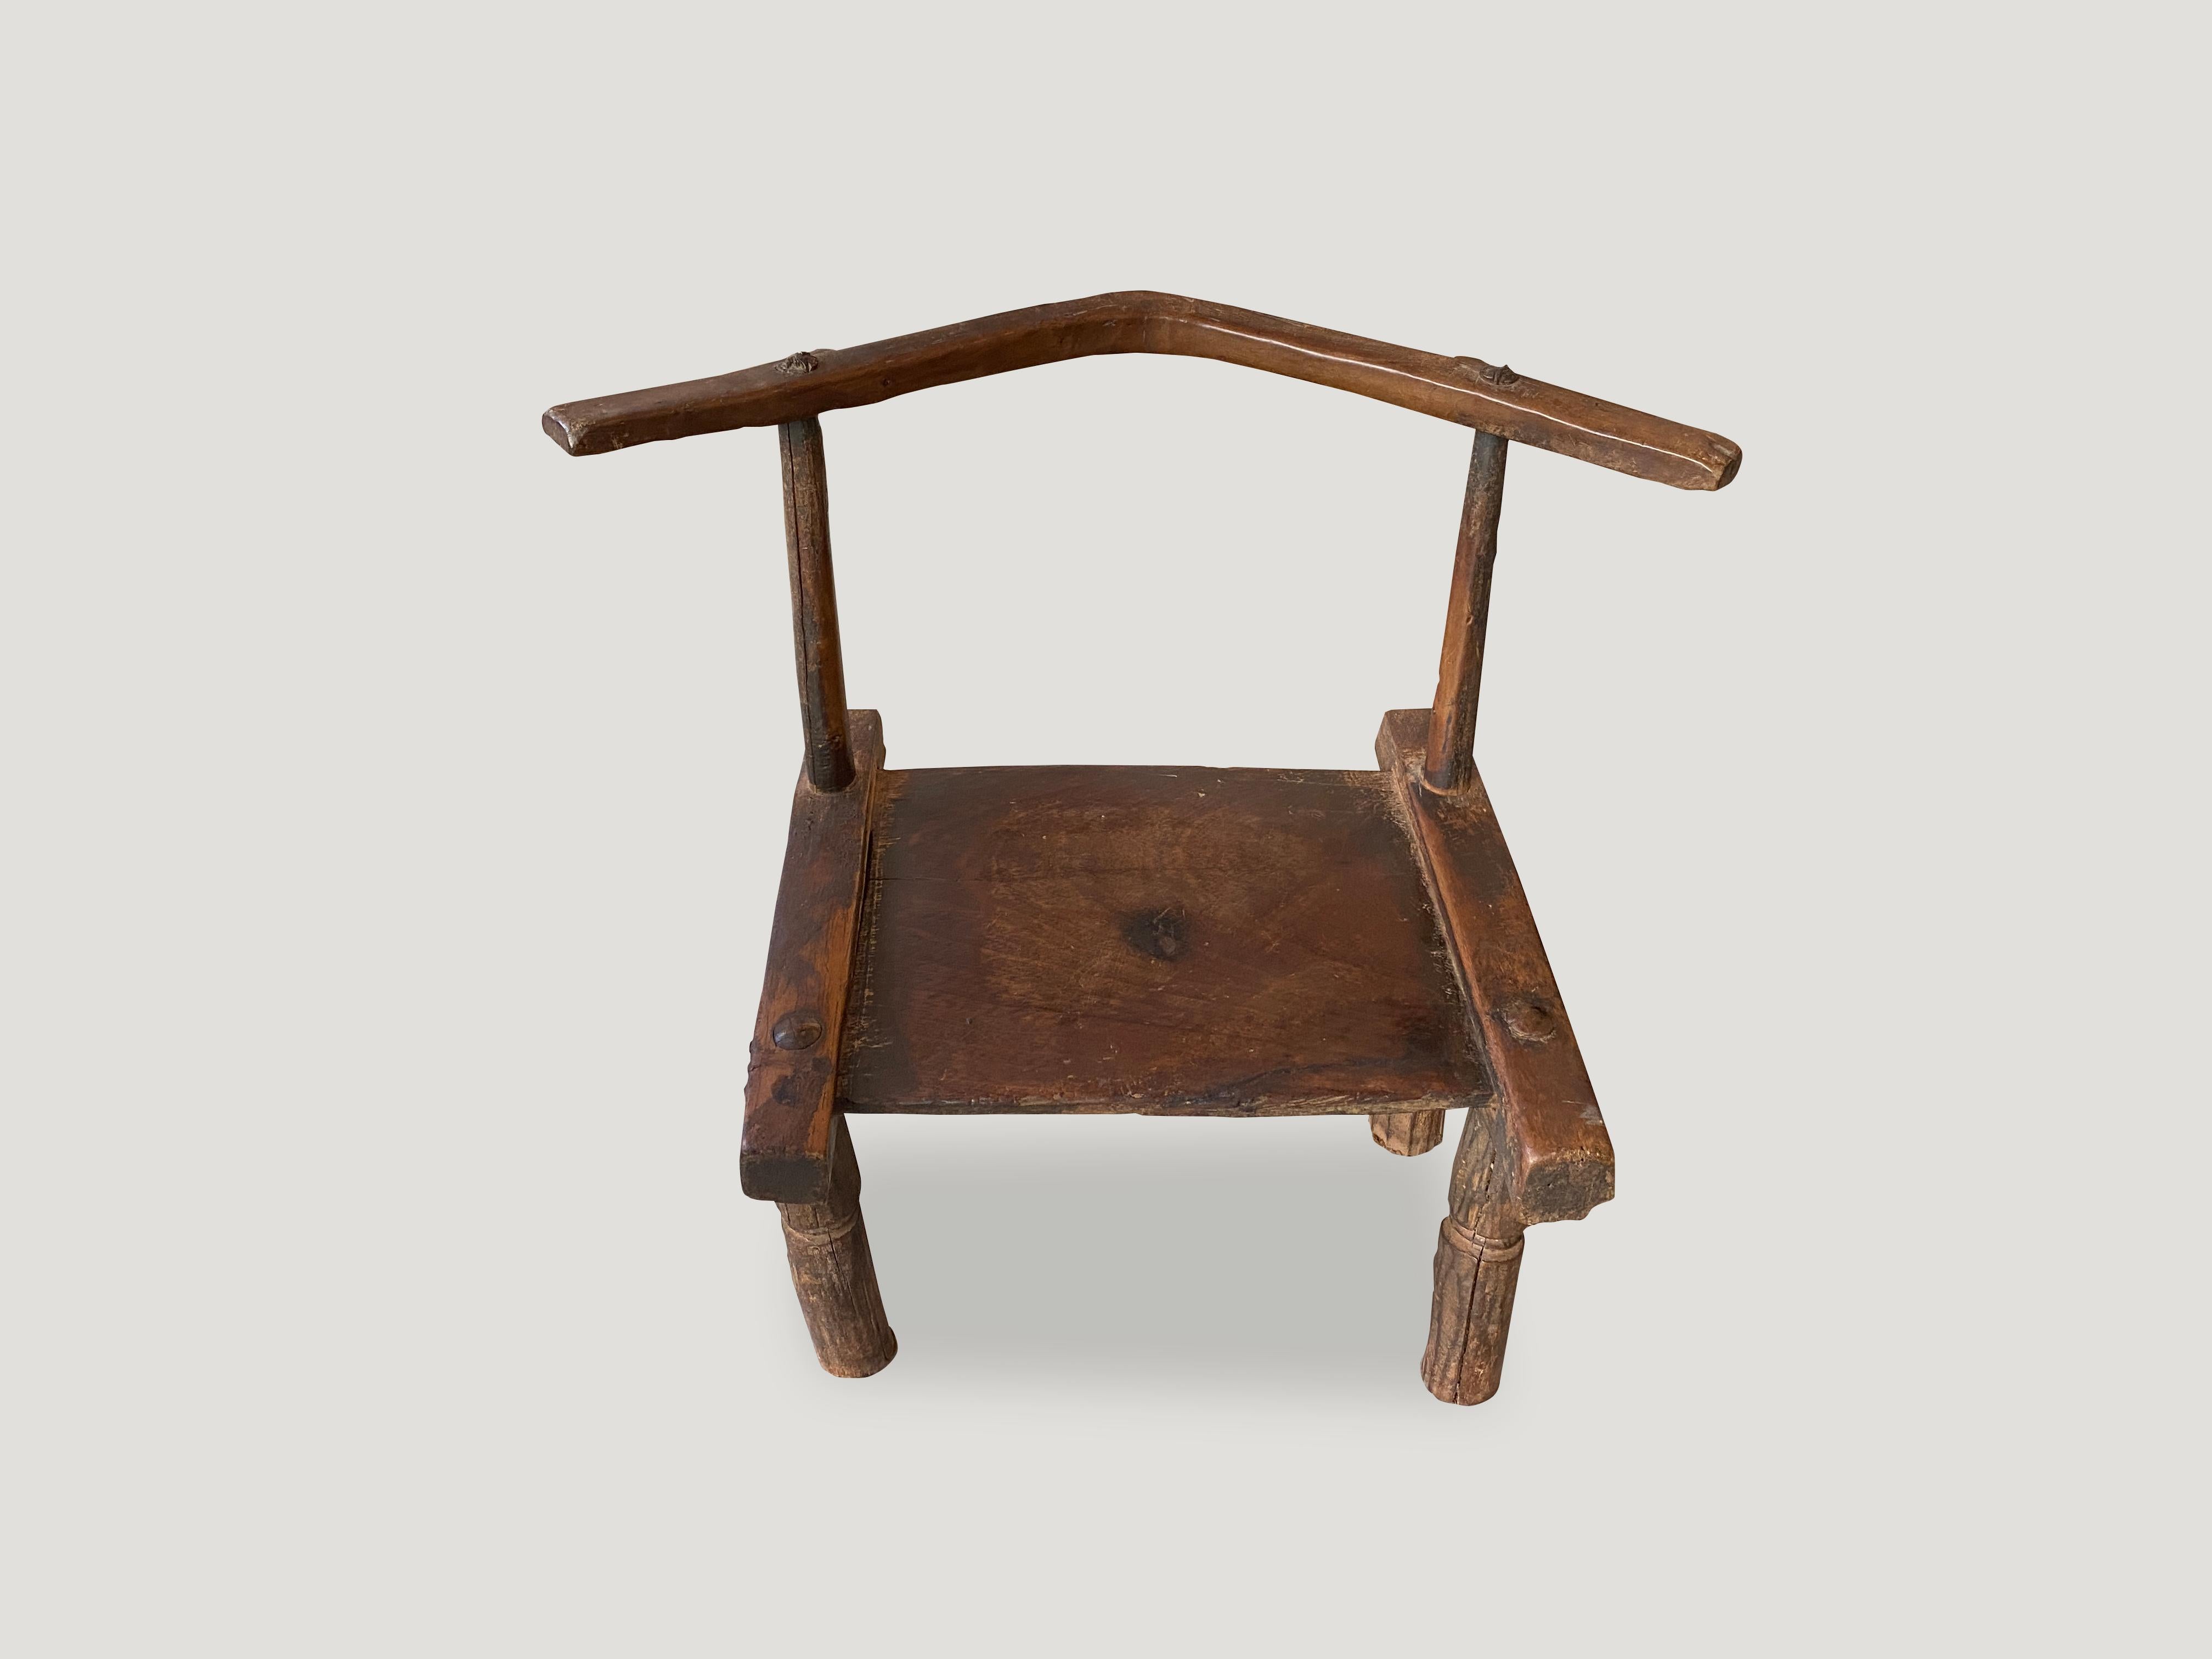 Beautiful patina on this 19th century hand carved wooden chair from the Ivory Coast of Africa. This can also be used as a low side table. A piece of art.

This chair was sourced in the spirit of wabi-sabi, a Japanese philosophy that beauty can be